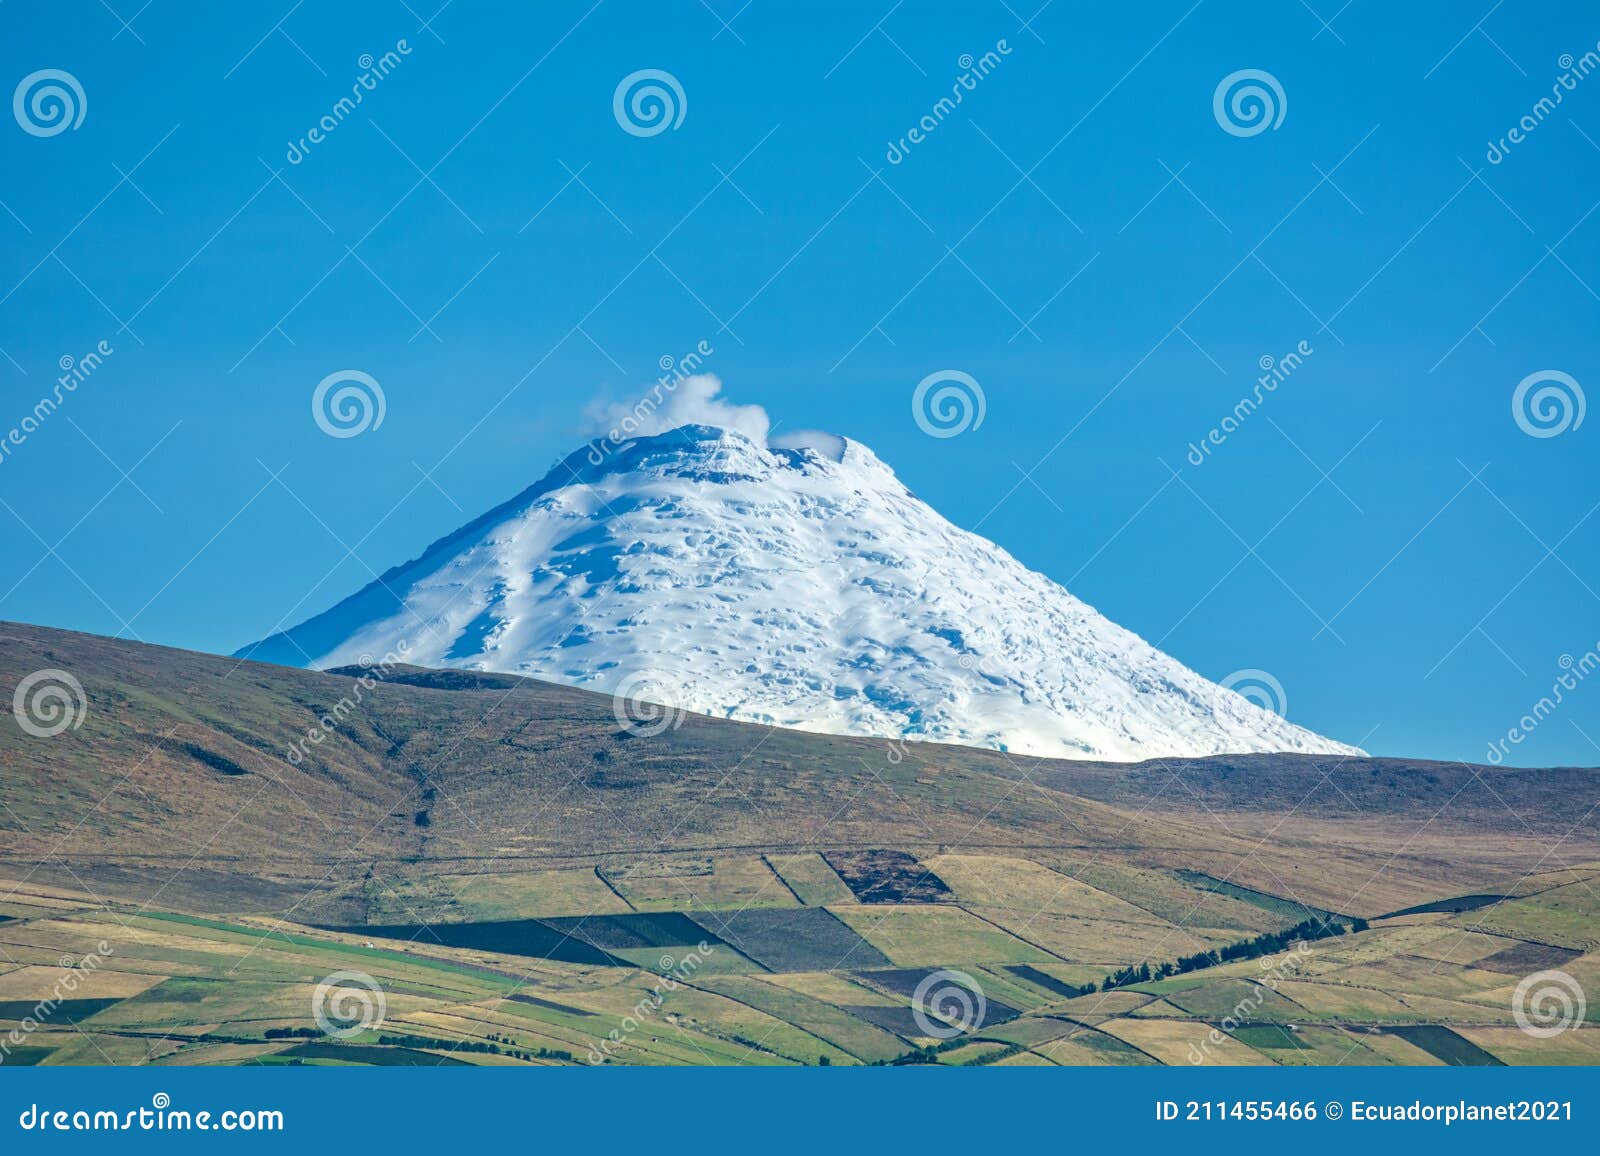 cotopaxi volcano is an active stratovolcano located in the andean zone of ecuador